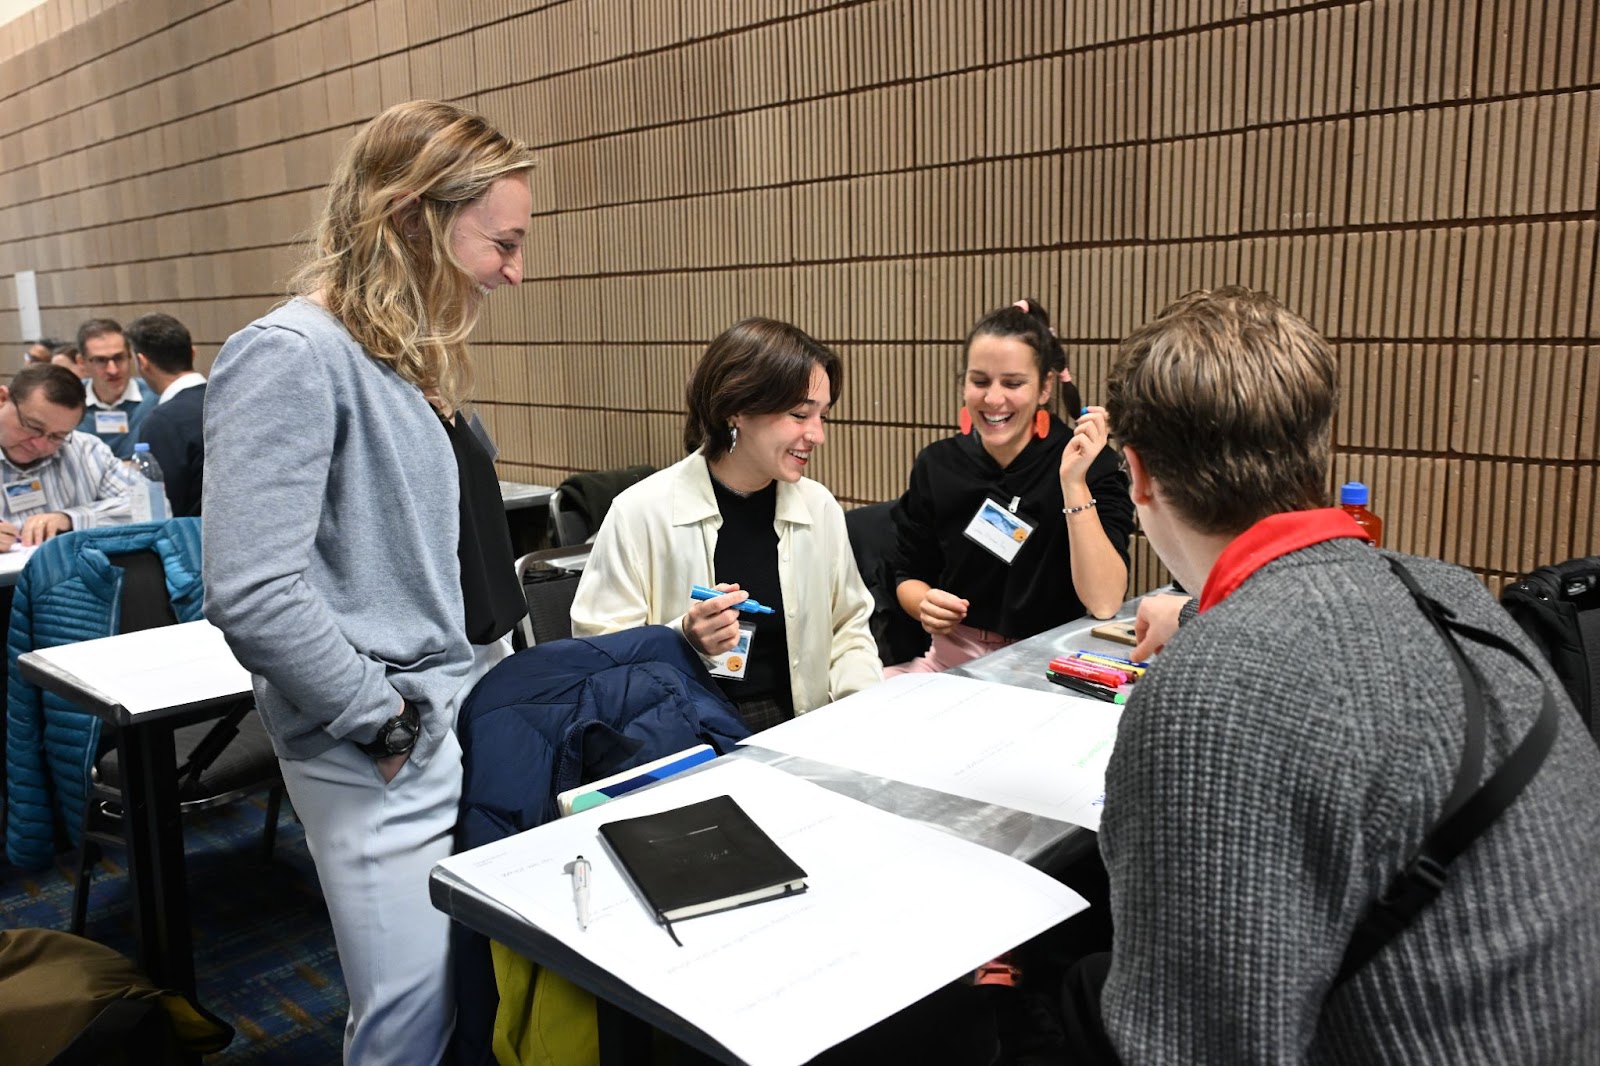 Four people in a group creating a plan to conduct, support, or inform field trials